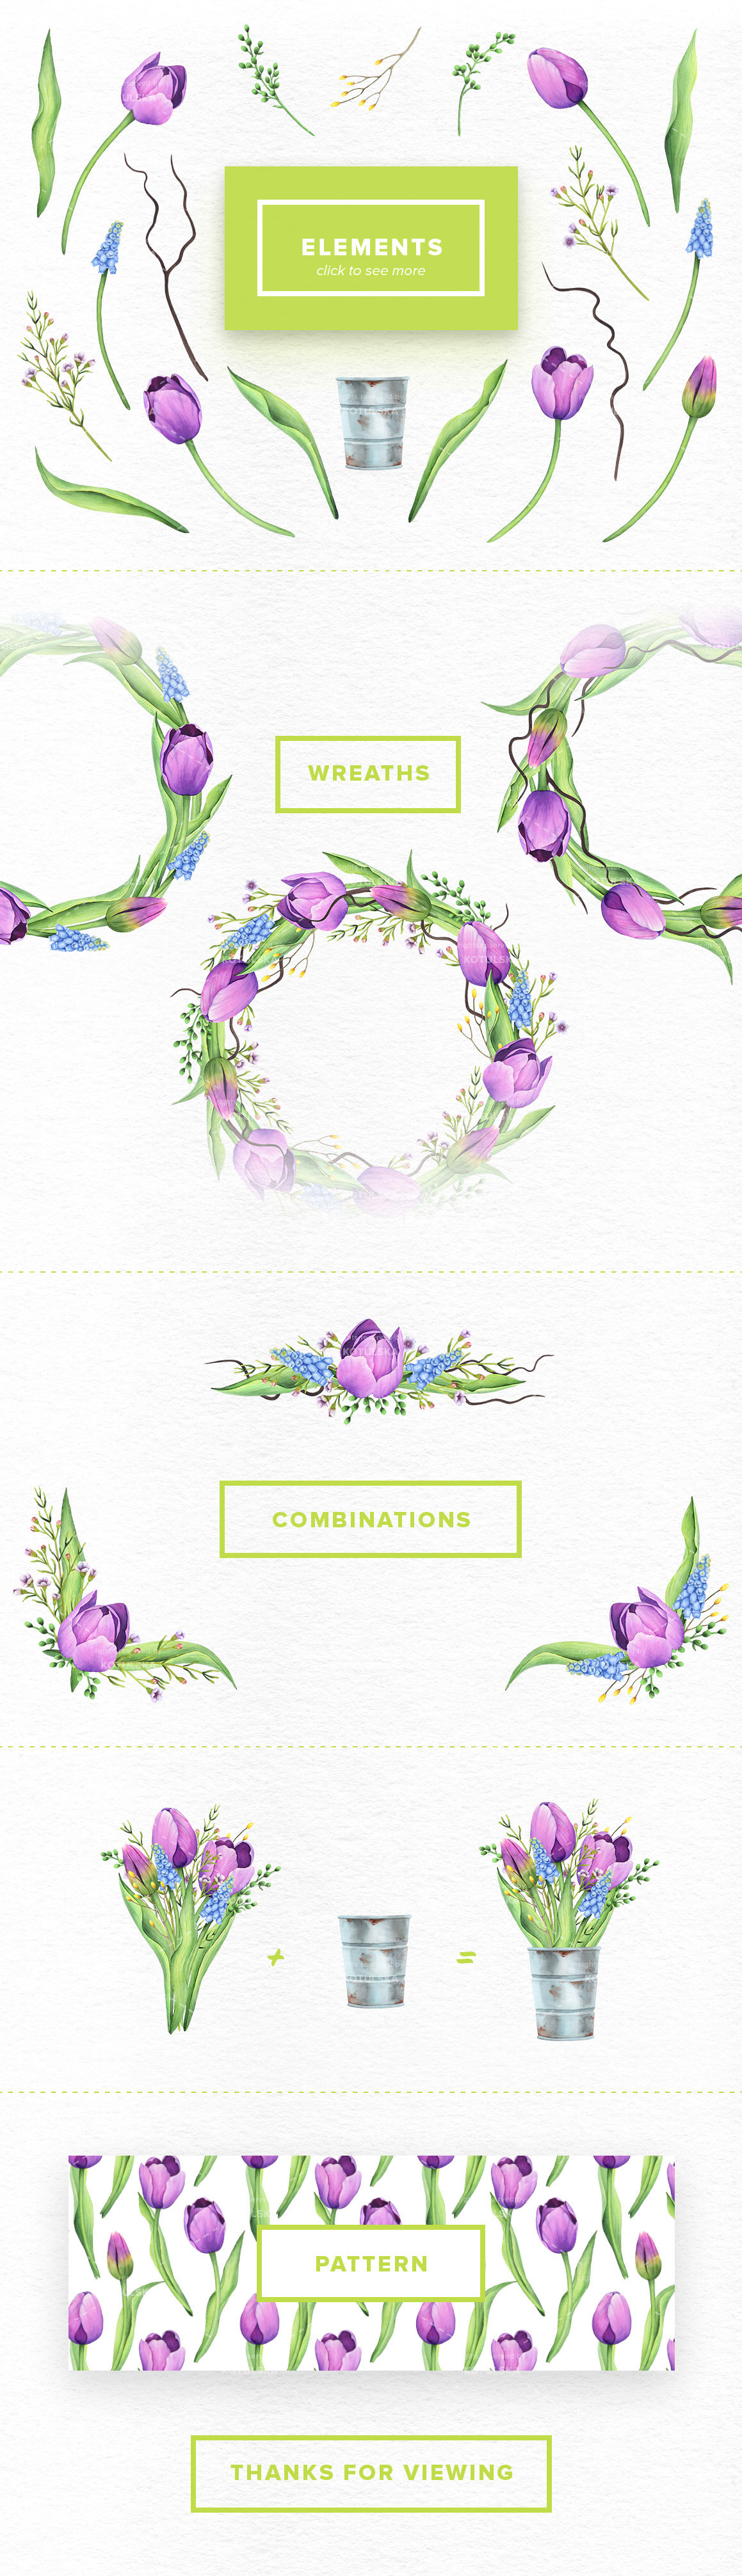 Flowers DIY watercolor clipart Invitation floral elements wreath painting  